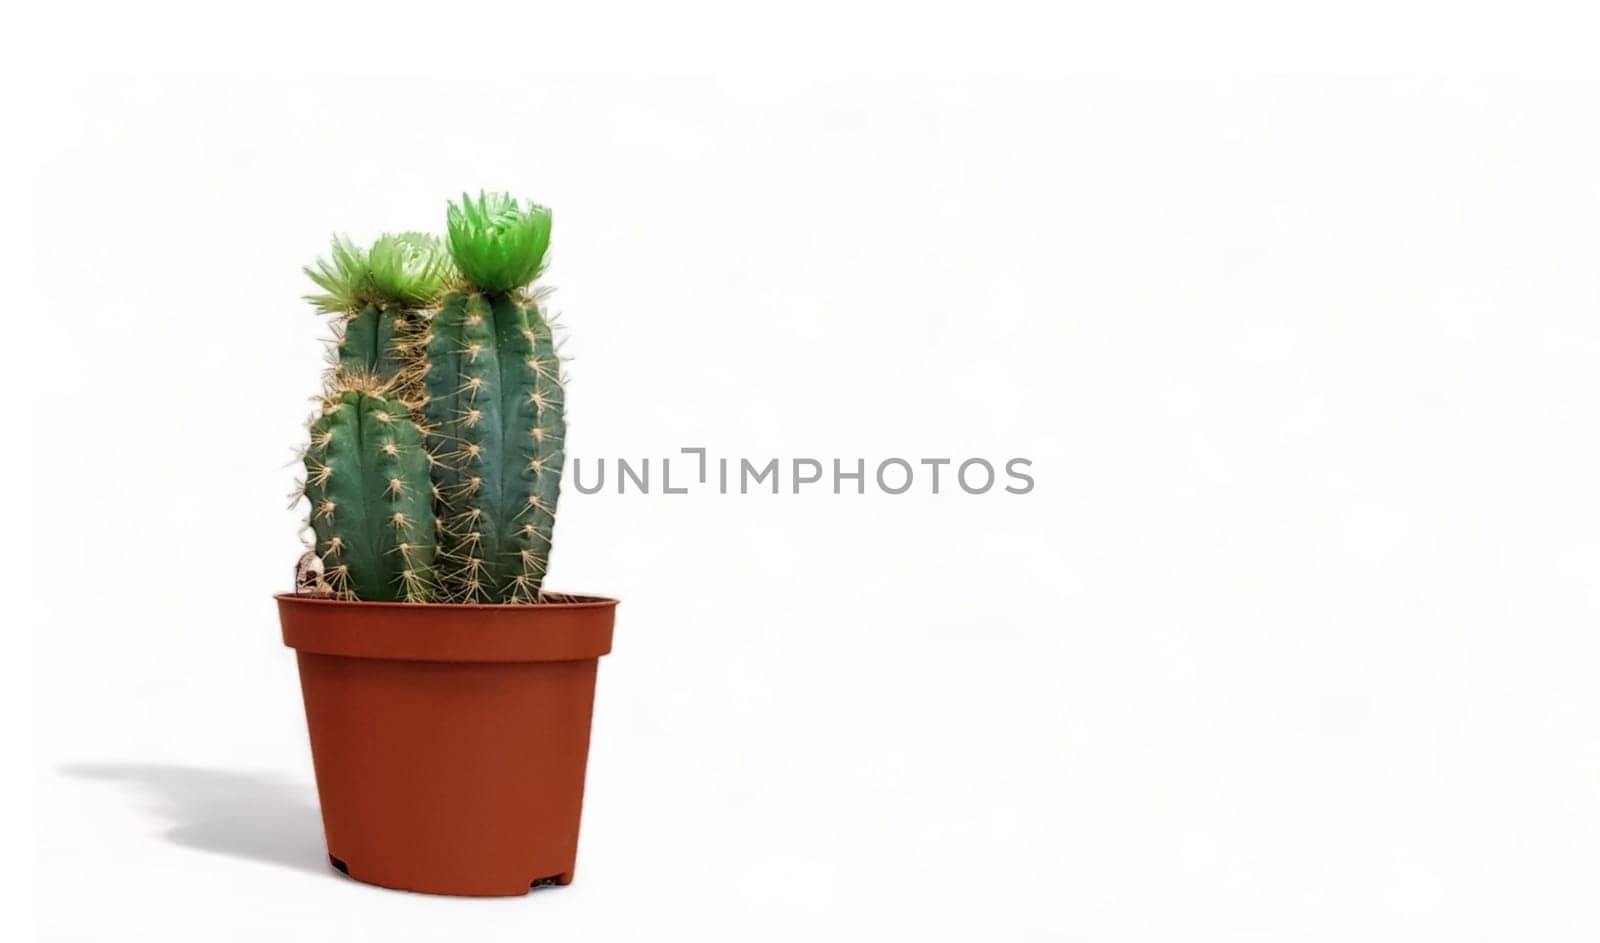 Small indoor cactus plant in a pot isolated on a white background front view. Natural nice green cactus flower with sharp white spines